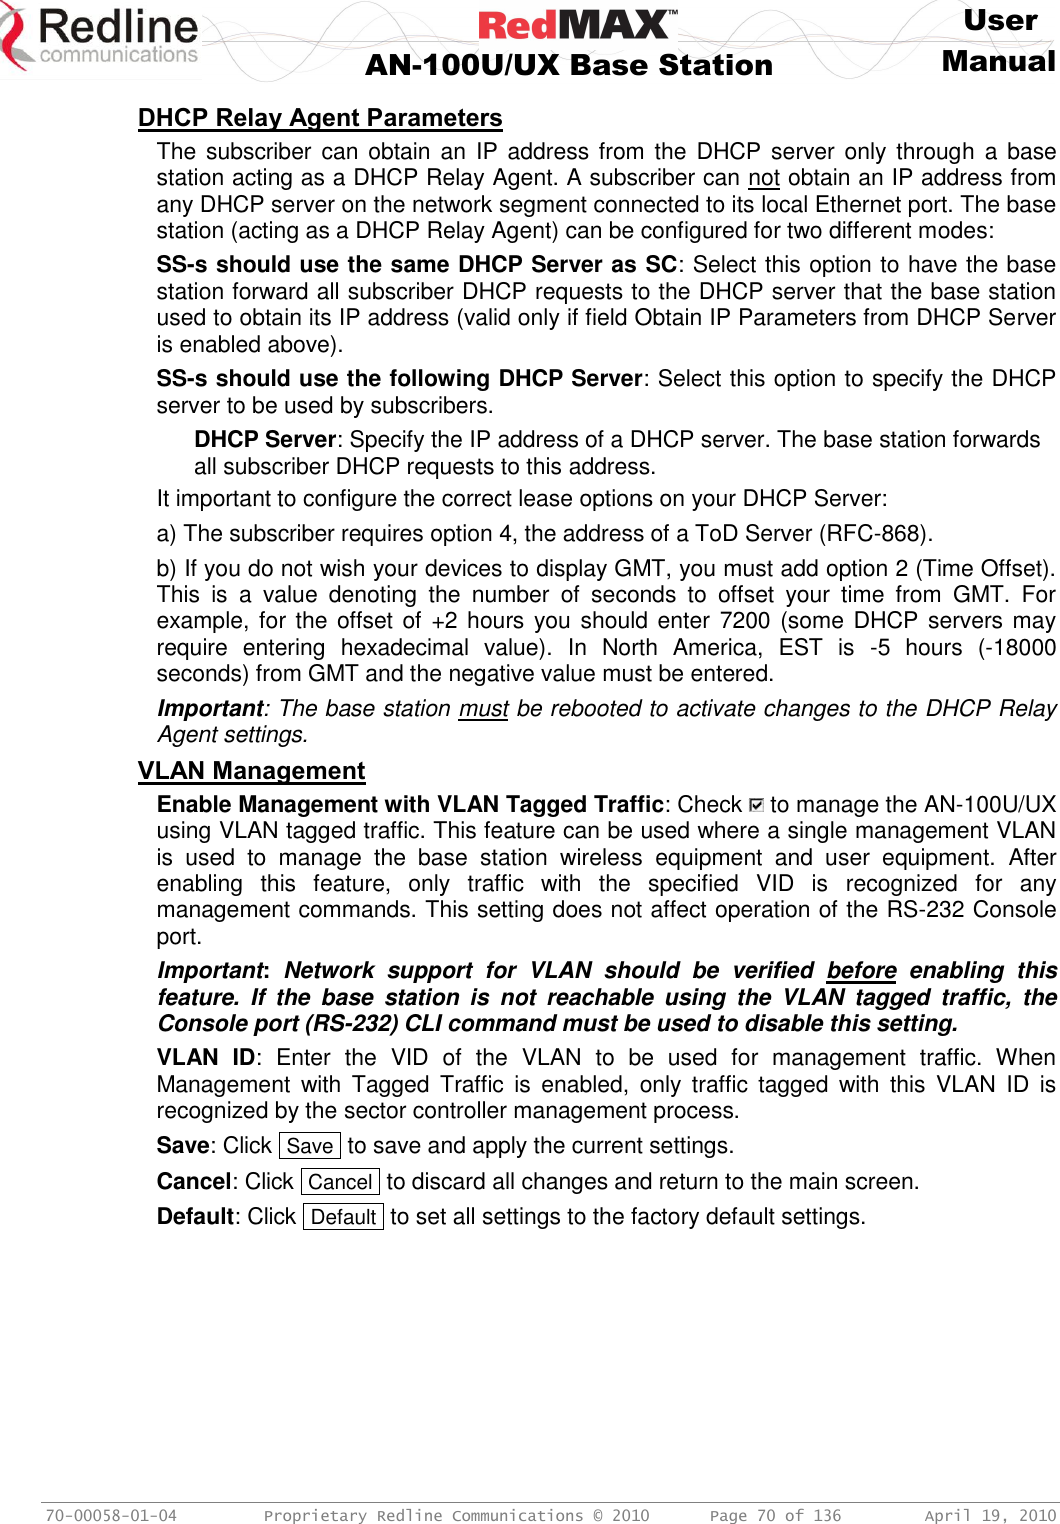     User  AN-100U/UX Base Station Manual   70-00058-01-04  Proprietary Redline Communications © 2010   Page 70 of 136  April 19, 2010 DHCP Relay Agent Parameters The subscriber  can obtain an  IP  address from the  DHCP server only through  a  base station acting as a DHCP Relay Agent. A subscriber can not obtain an IP address from any DHCP server on the network segment connected to its local Ethernet port. The base station (acting as a DHCP Relay Agent) can be configured for two different modes: SS-s should use the same DHCP Server as SC: Select this option to have the base station forward all subscriber DHCP requests to the DHCP server that the base station used to obtain its IP address (valid only if field Obtain IP Parameters from DHCP Server is enabled above). SS-s should use the following DHCP Server: Select this option to specify the DHCP server to be used by subscribers. DHCP Server: Specify the IP address of a DHCP server. The base station forwards all subscriber DHCP requests to this address.  It important to configure the correct lease options on your DHCP Server: a) The subscriber requires option 4, the address of a ToD Server (RFC-868). b) If you do not wish your devices to display GMT, you must add option 2 (Time Offset). This  is  a  value  denoting  the  number  of  seconds  to  offset  your  time  from  GMT.  For example, for the offset of +2 hours you should enter 7200 (some DHCP servers may require  entering  hexadecimal  value).  In  North  America,  EST  is  -5  hours  (-18000 seconds) from GMT and the negative value must be entered. Important: The base station must be rebooted to activate changes to the DHCP Relay Agent settings. VLAN Management Enable Management with VLAN Tagged Traffic: Check   to manage the AN-100U/UX using VLAN tagged traffic. This feature can be used where a single management VLAN is  used  to  manage  the  base  station  wireless  equipment  and  user  equipment.  After enabling  this  feature,  only  traffic  with  the  specified  VID  is  recognized  for  any management commands. This setting does not affect operation of the RS-232 Console port. Important:  Network  support  for  VLAN  should  be  verified  before  enabling  this feature.  If  the  base  station  is  not  reachable  using  the  VLAN  tagged  traffic,  the Console port (RS-232) CLI command must be used to disable this setting. VLAN  ID:  Enter  the  VID  of  the  VLAN  to  be  used  for  management  traffic.  When Management  with  Tagged  Traffic  is  enabled,  only  traffic  tagged  with  this  VLAN  ID  is recognized by the sector controller management process. Save: Click  Save  to save and apply the current settings. Cancel: Click  Cancel  to discard all changes and return to the main screen. Default: Click  Default  to set all settings to the factory default settings. 